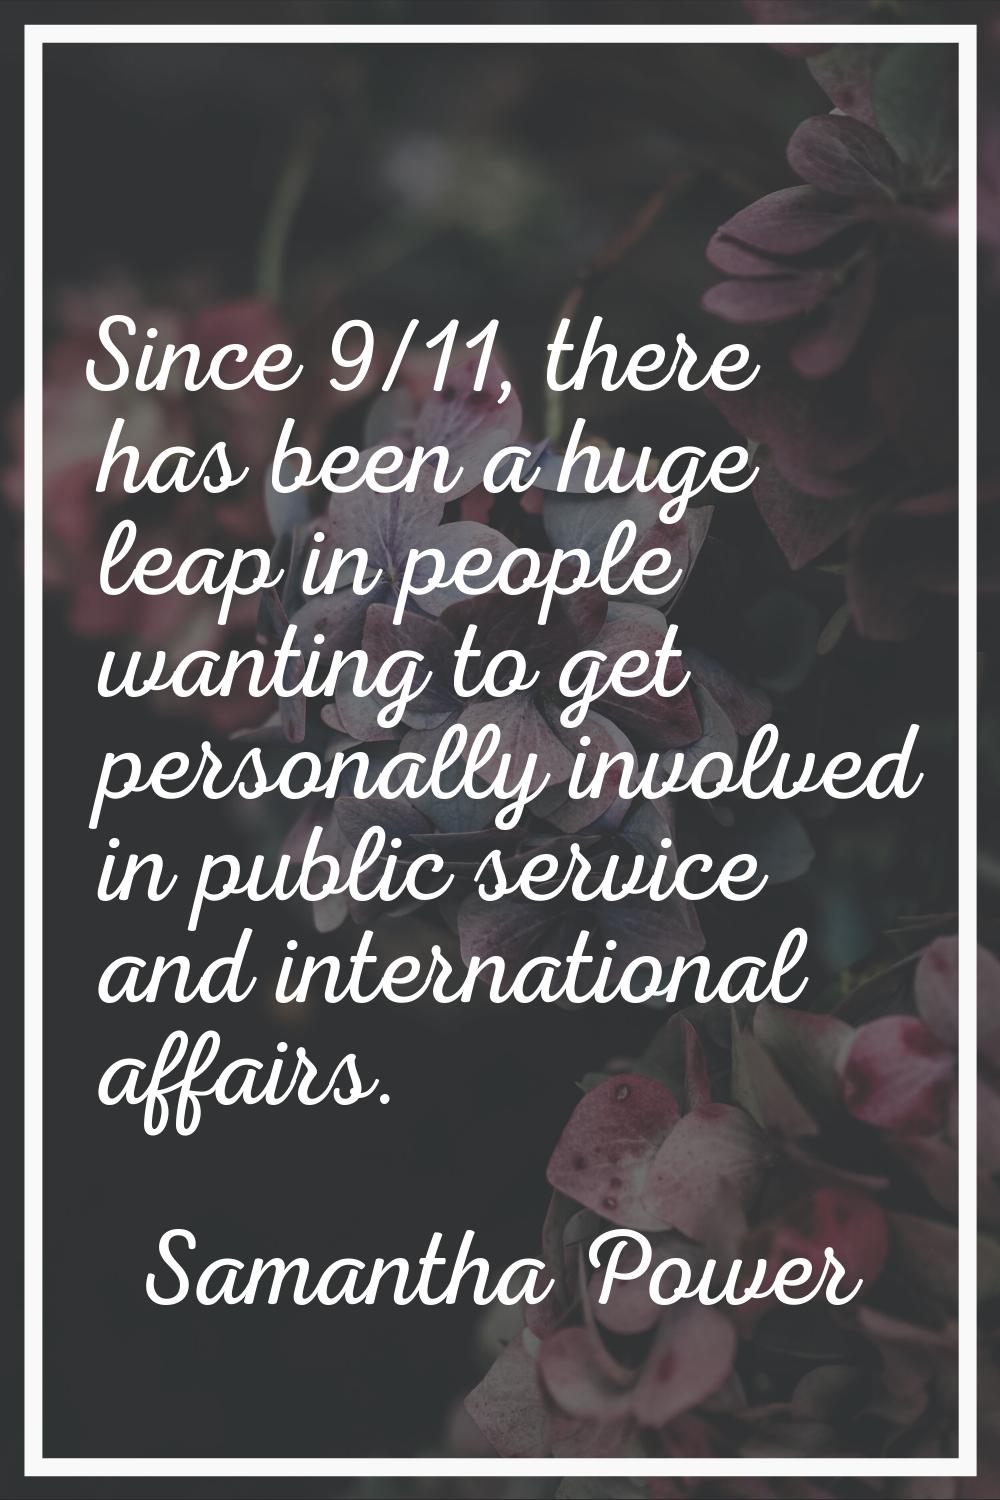 Since 9/11, there has been a huge leap in people wanting to get personally involved in public servi